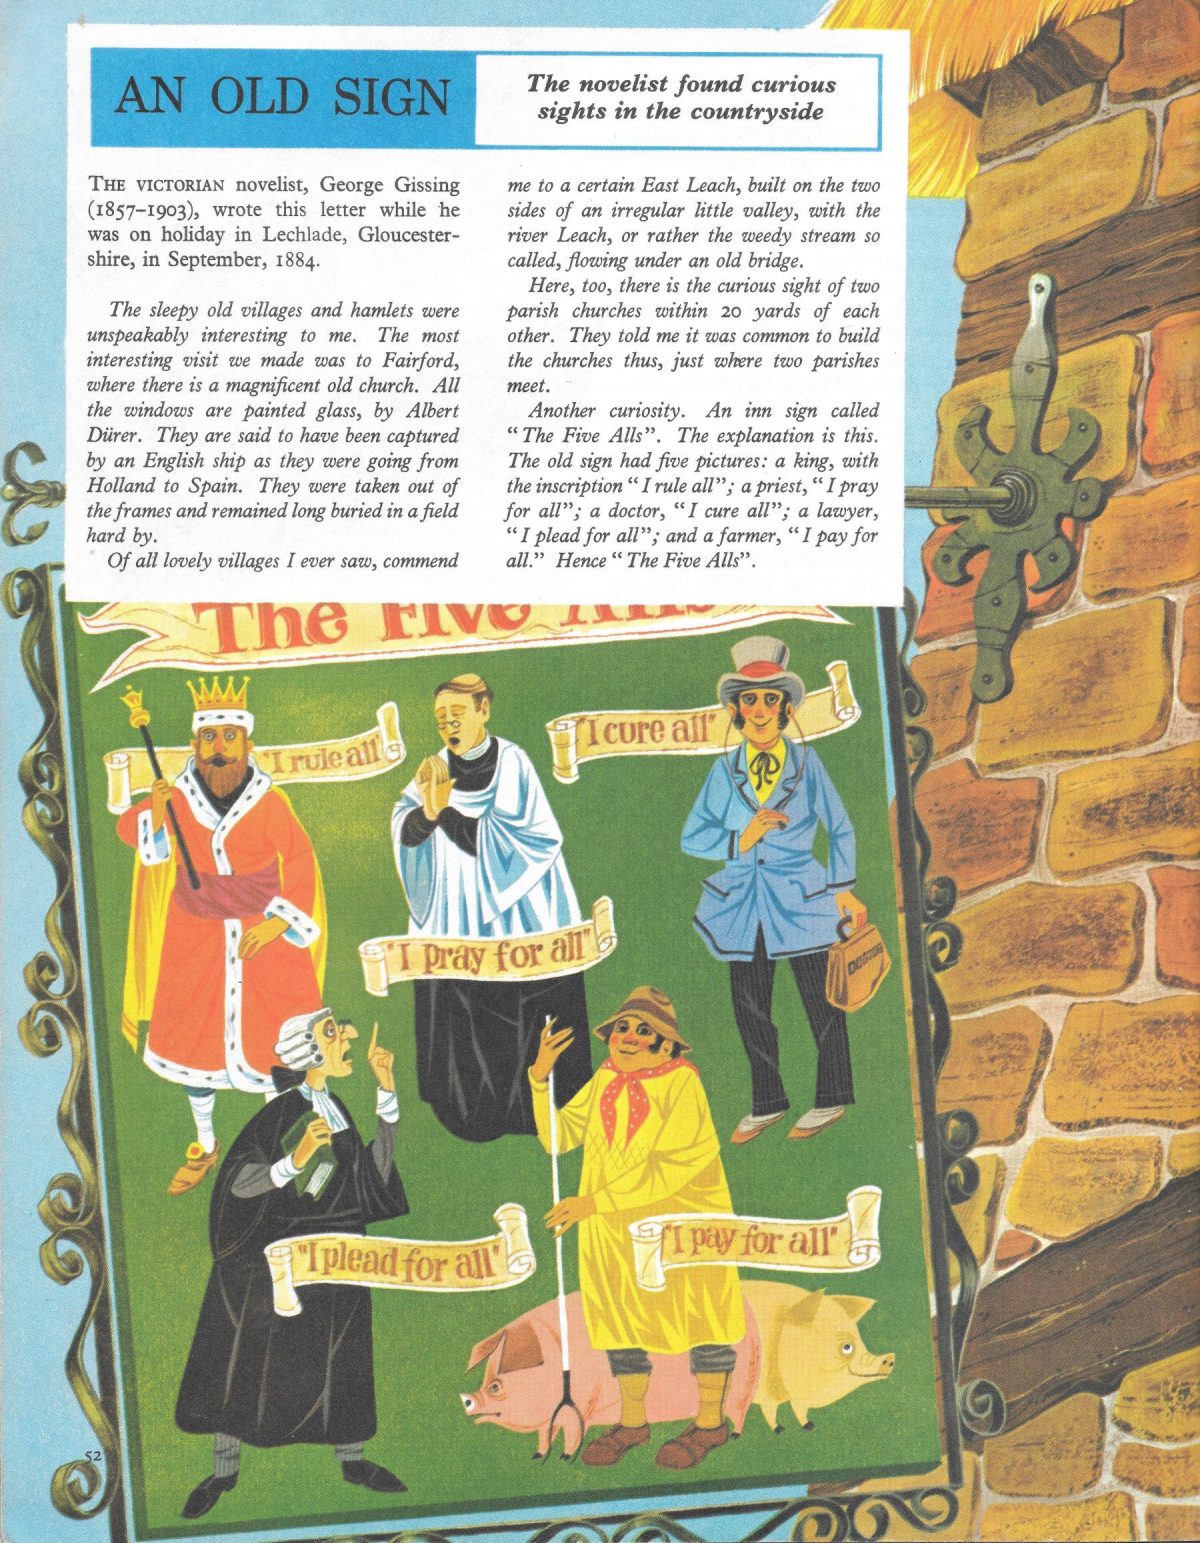 Finding Out Treasury, books, illustration, education, 1960s